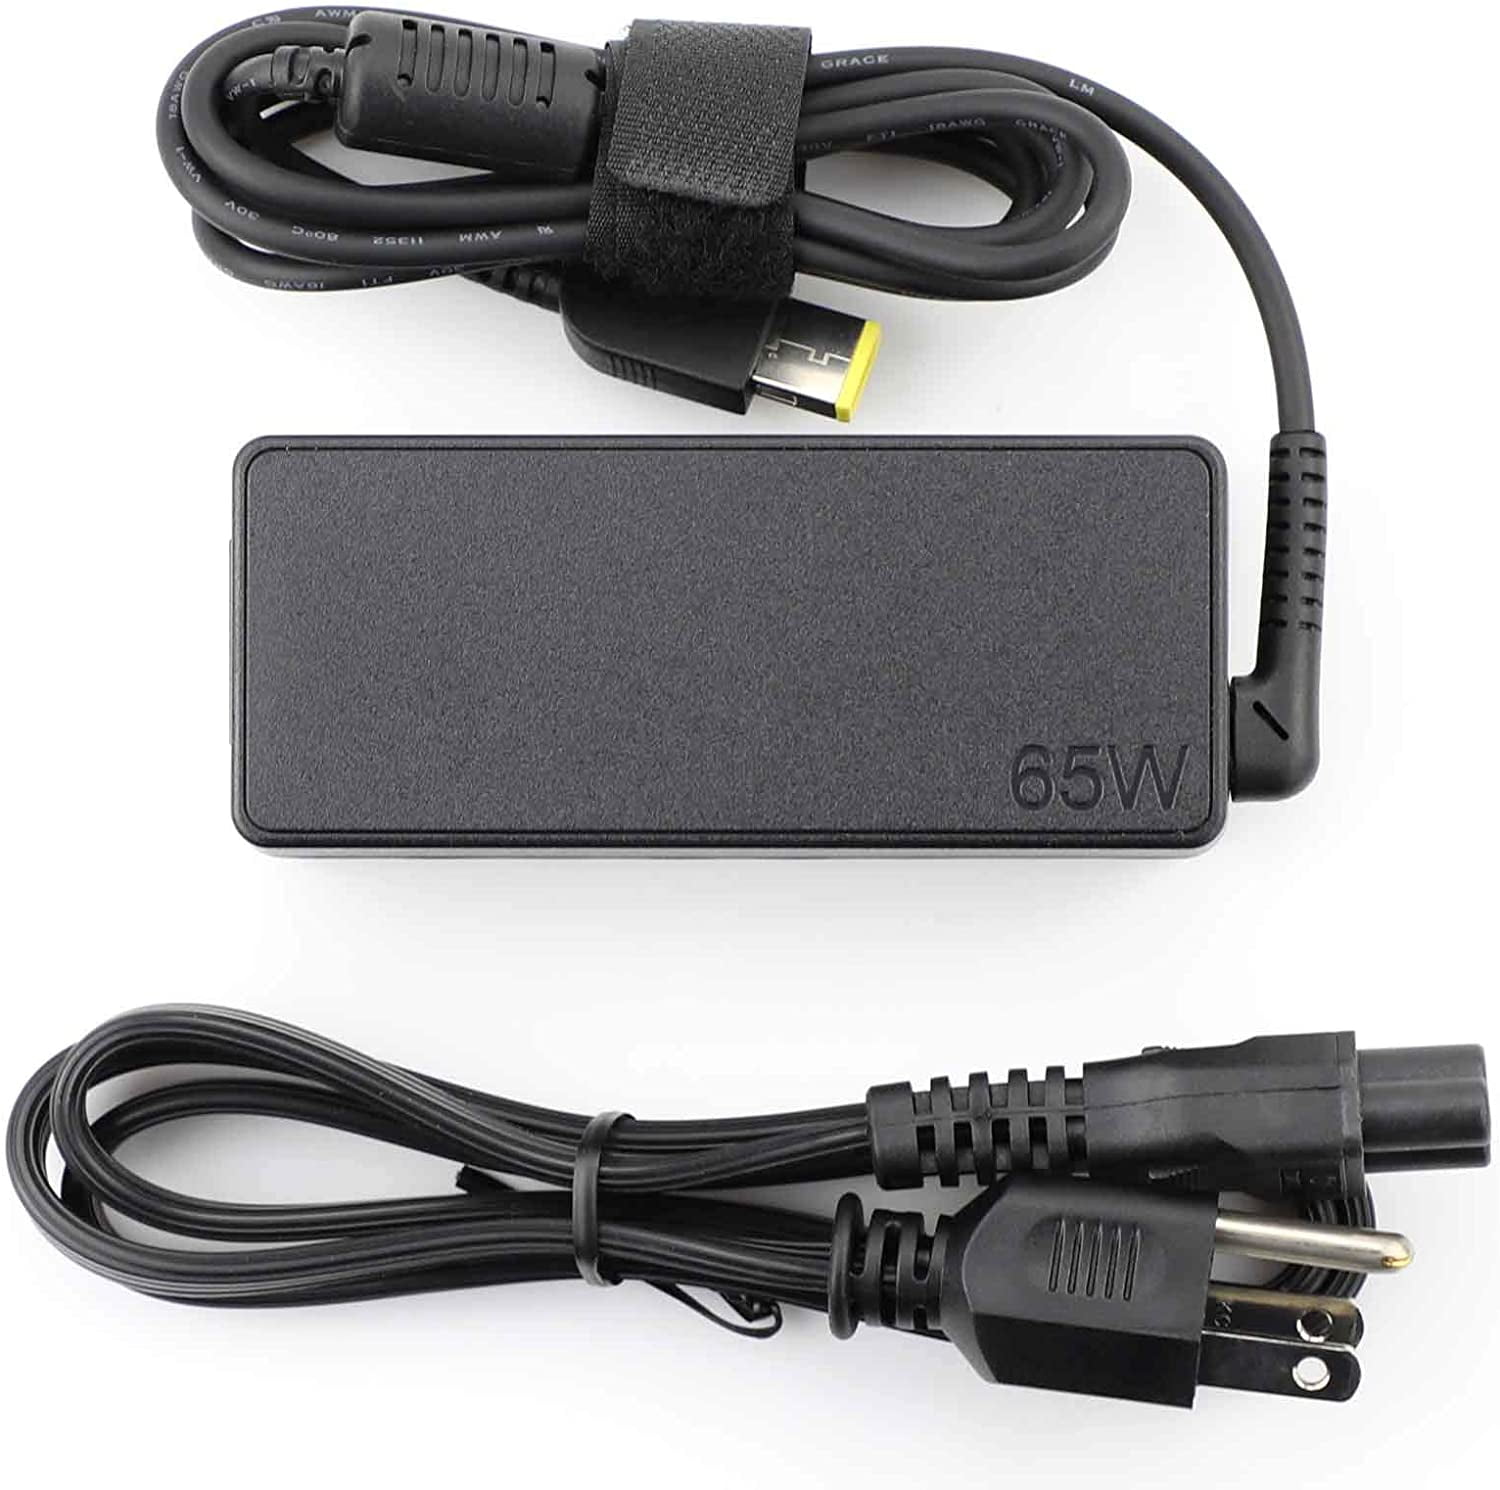 65W Laptop Charger ADLX65NLC2A, PA-1650-37LC Adapter for Lenovo Yoga 13 Series Convertible Tablet Essential G700 59385692 Notebook